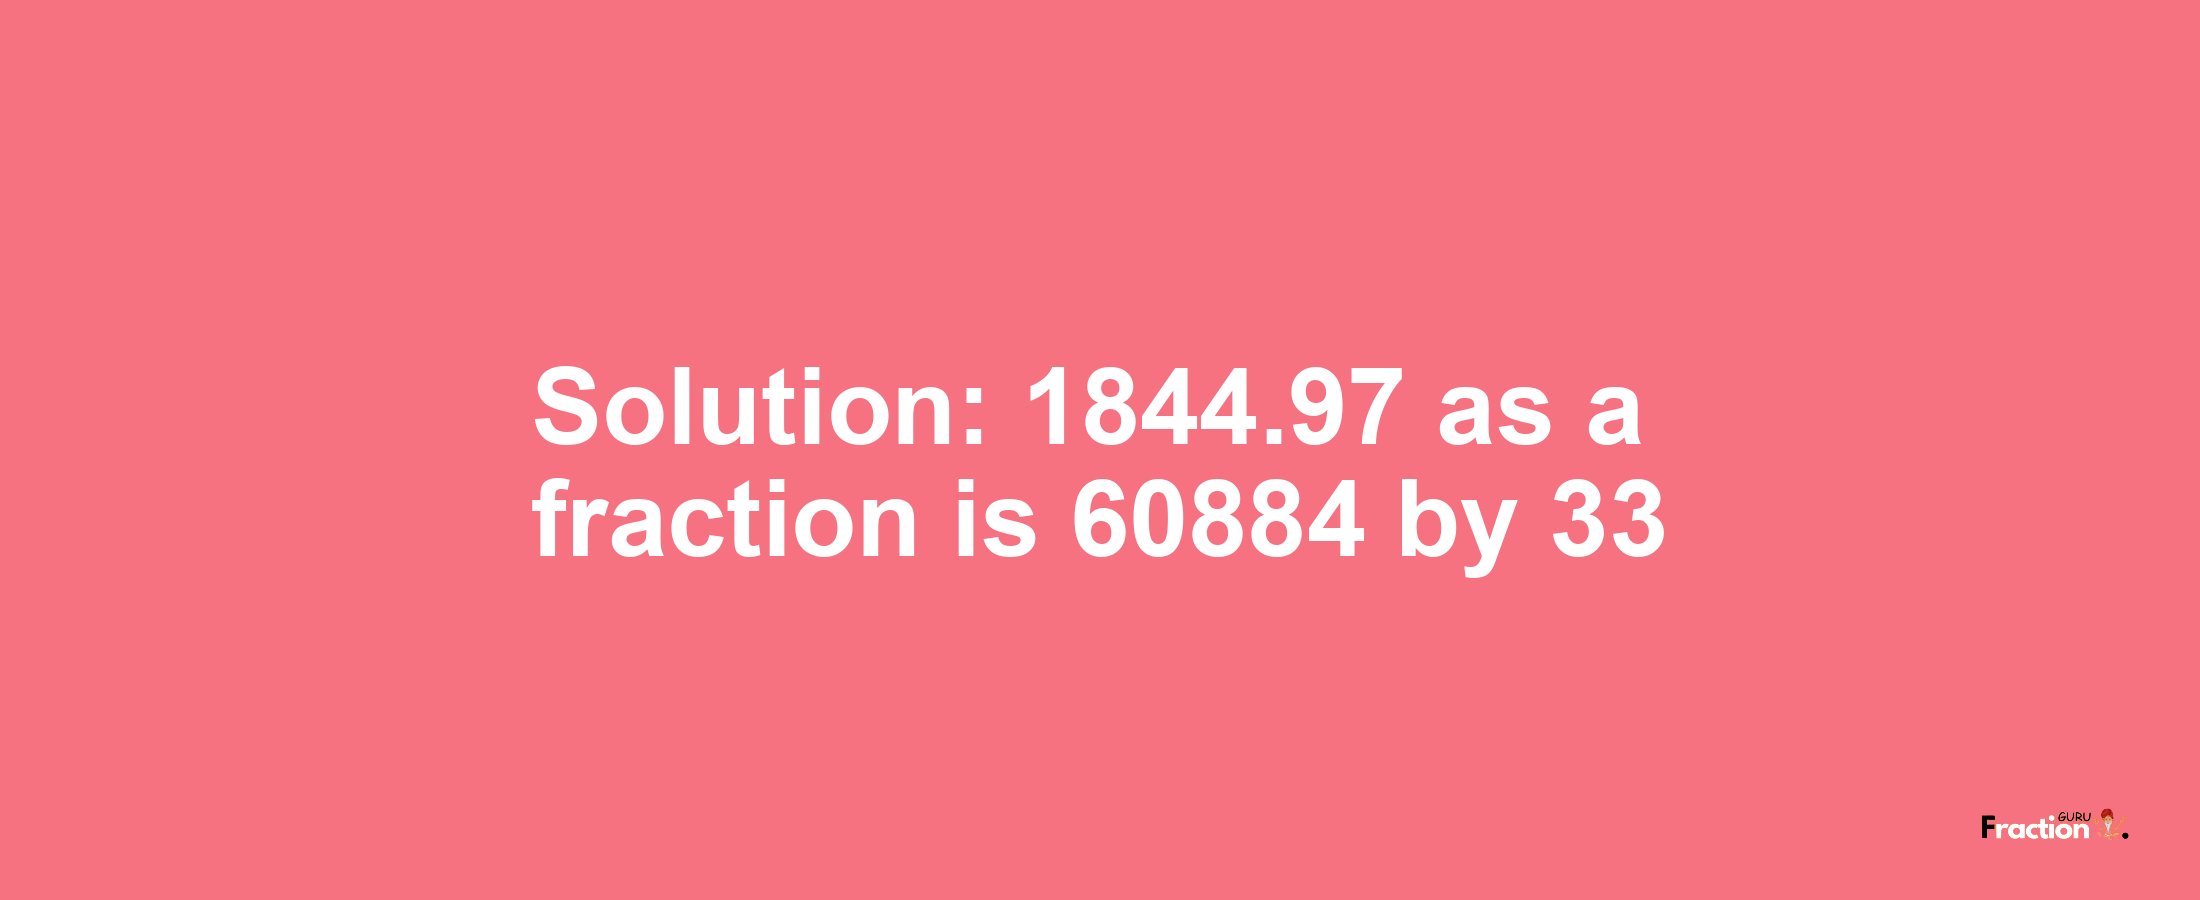 Solution:1844.97 as a fraction is 60884/33